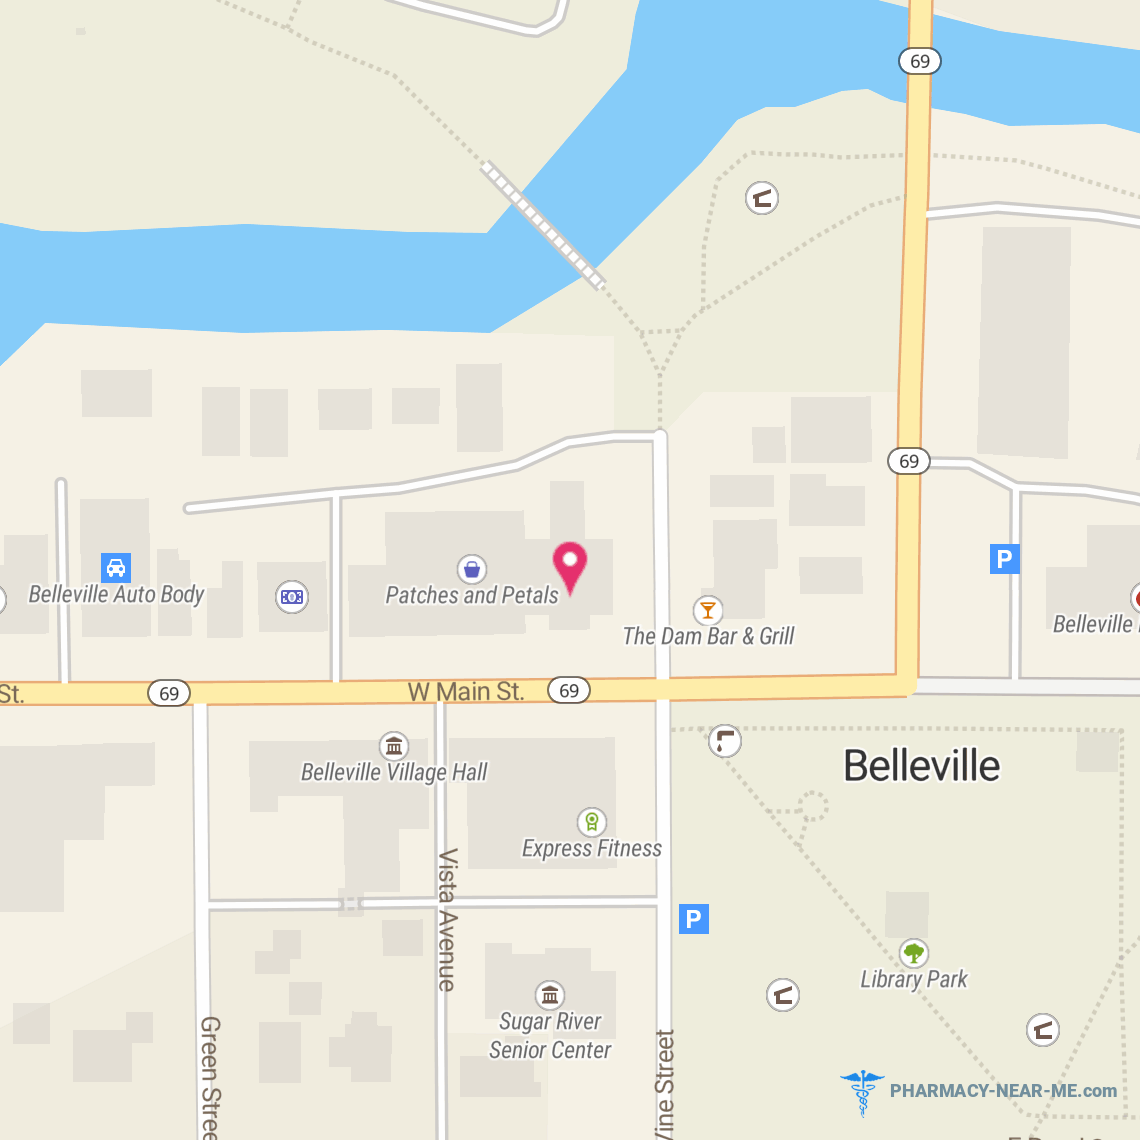 BELLEVILLE HOMETOWN PHARMACY LLC - Pharmacy Hours, Phone, Reviews & Information: 1 West Main Street, Belleville, Wisconsin 53508, United States